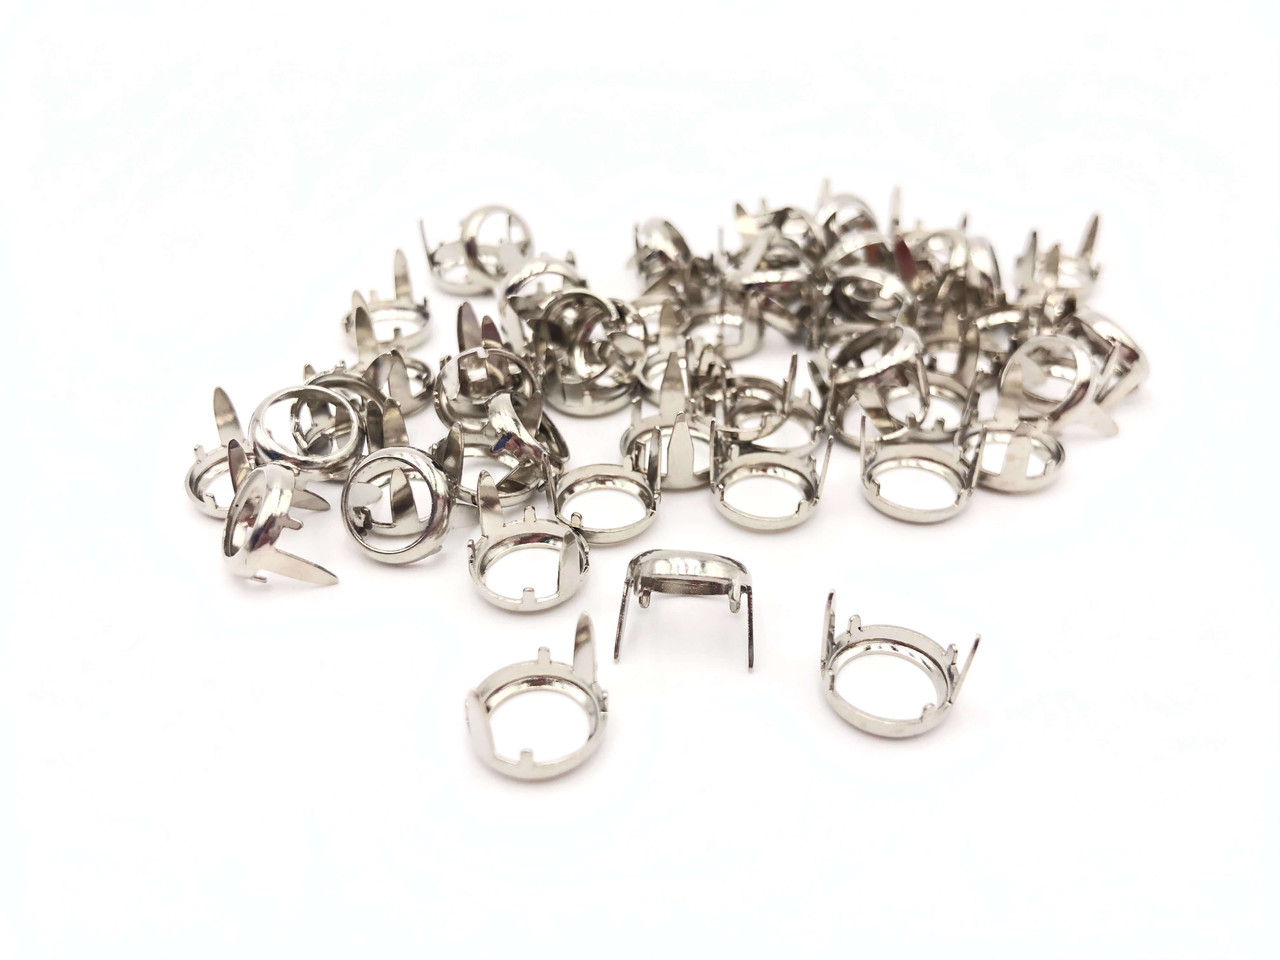 Ring Spot, Silver Rim Sets, Rhinestones, Flat Back Prong Setting, Nickel  Over Solid Brass, Quantity 50